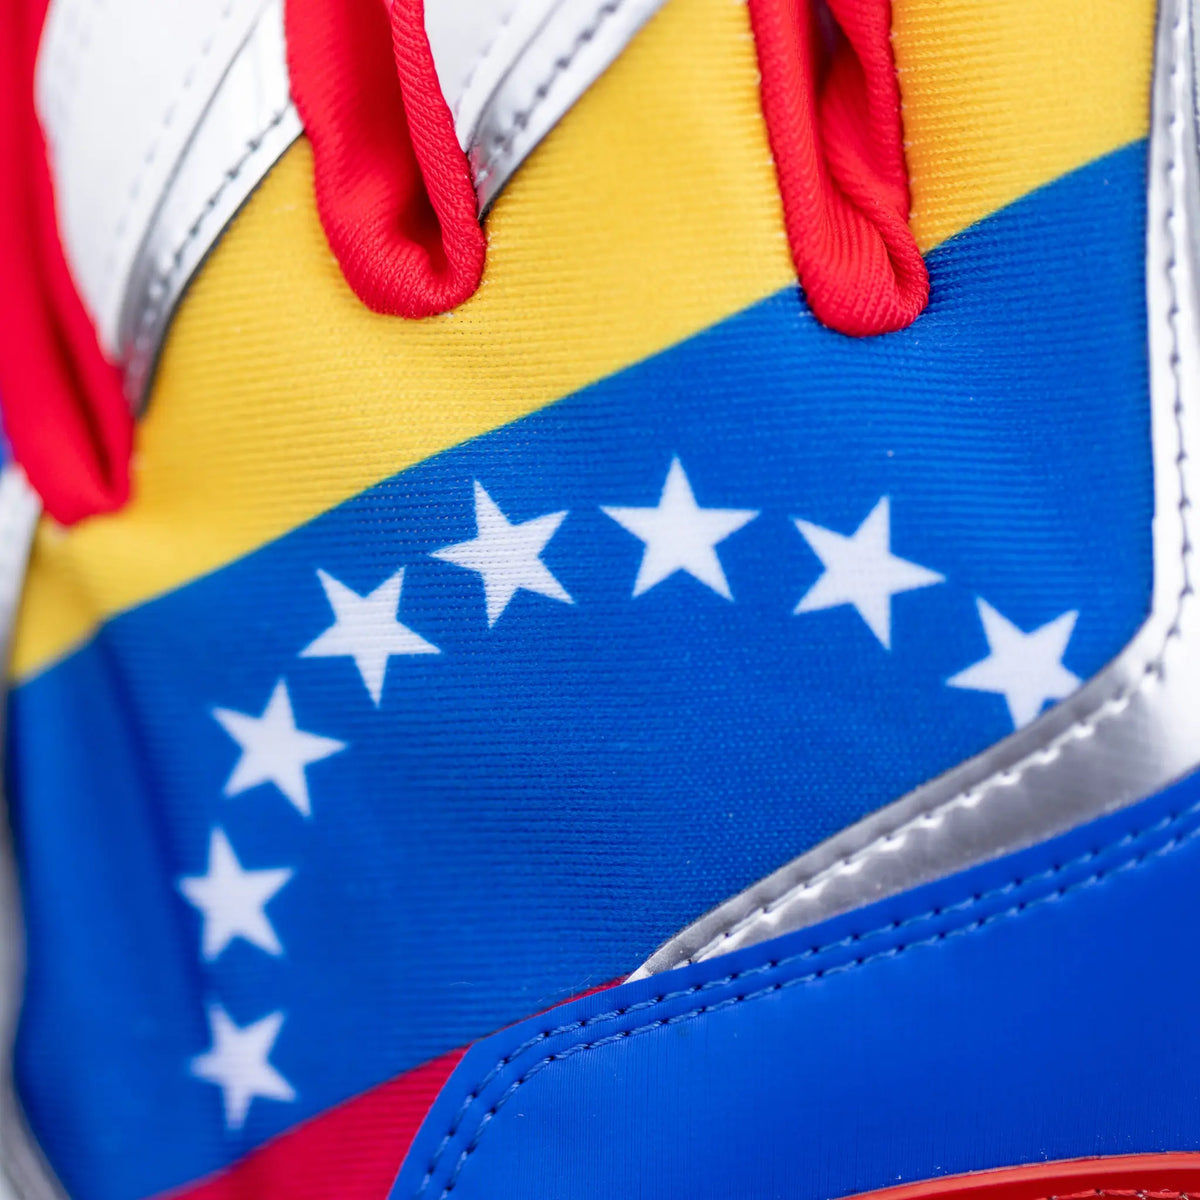 Detail of Tater Baseball batting gloves showing a close-up of the vibrant Venezuelan flag design with a starry blue band and contrasting yellow and red, symbolizing national pride on high-performance gear.